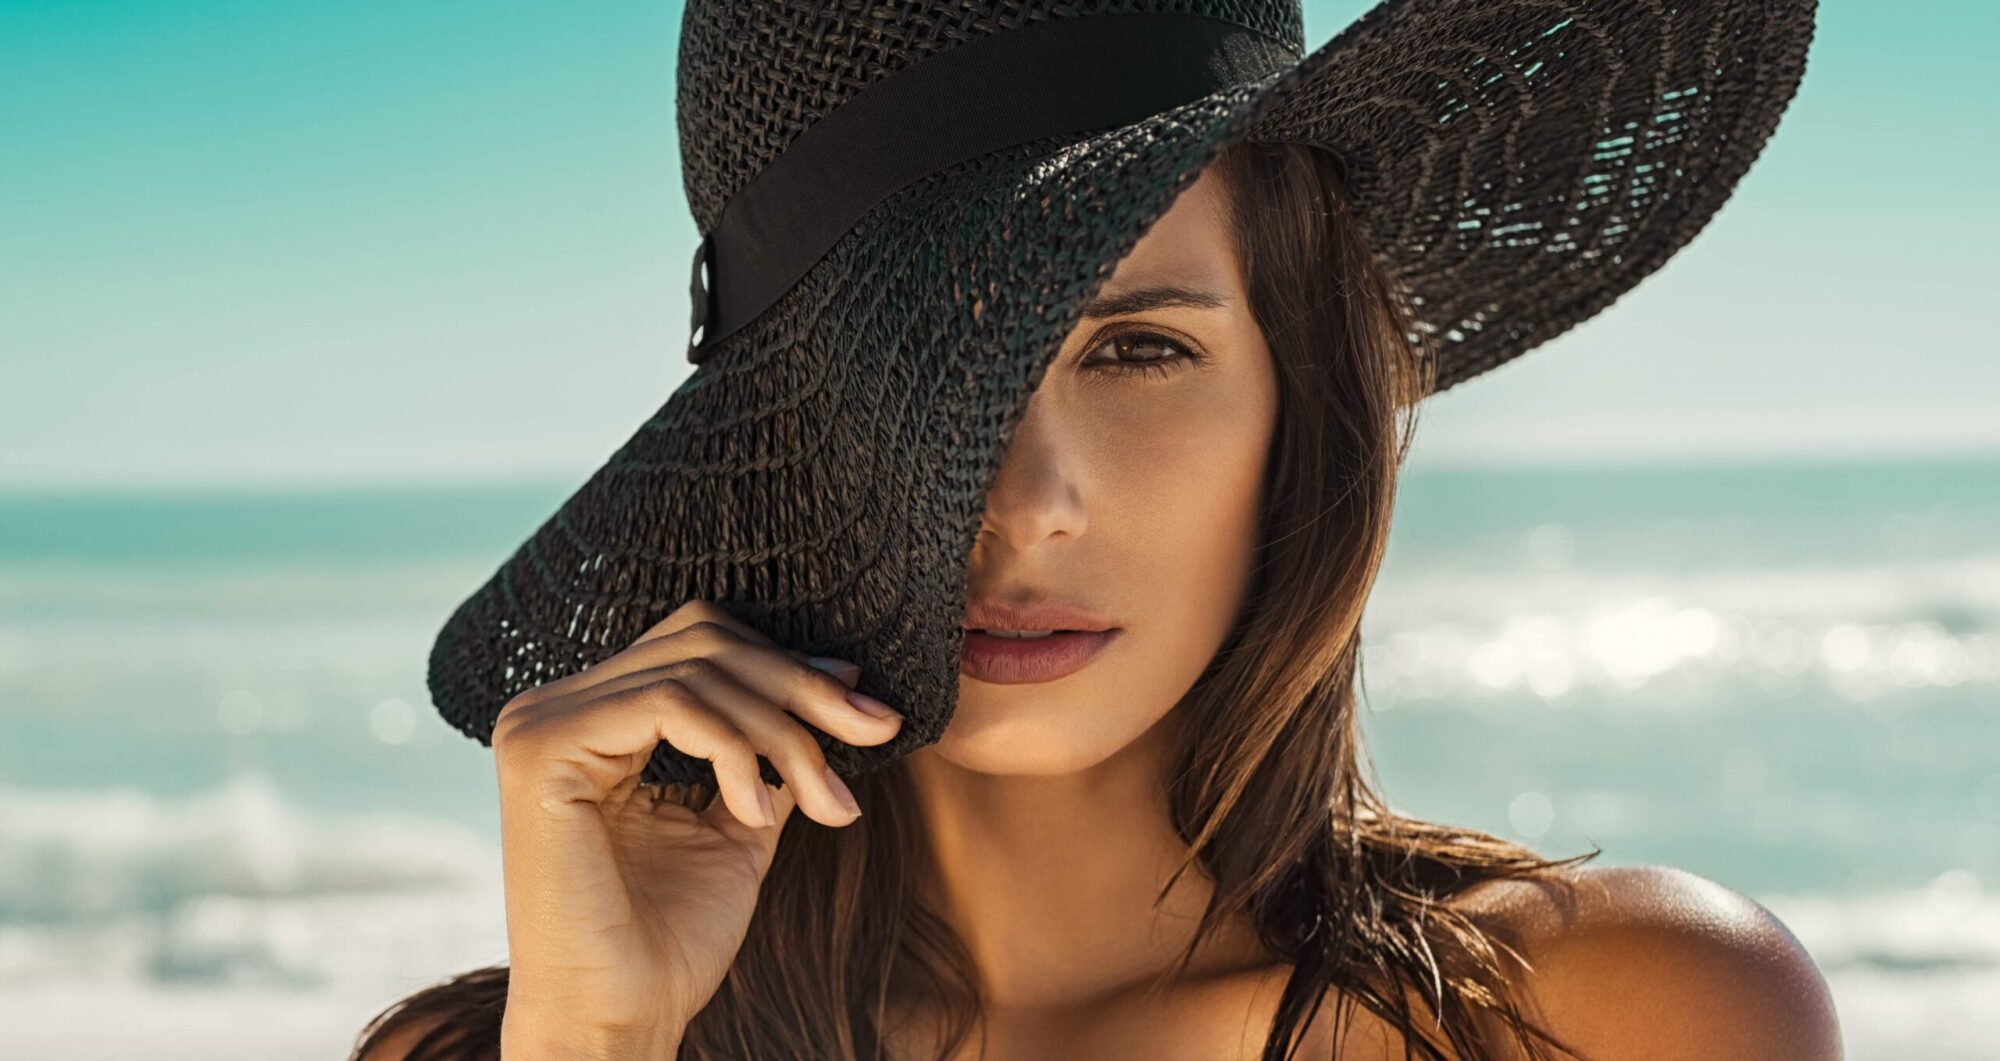 Portrait of fashion young woman posing against sea wearing a black straw hat. Sensual girl covering half face with hat on beach with copy space. Attractive girl looking at camera with sea in background.